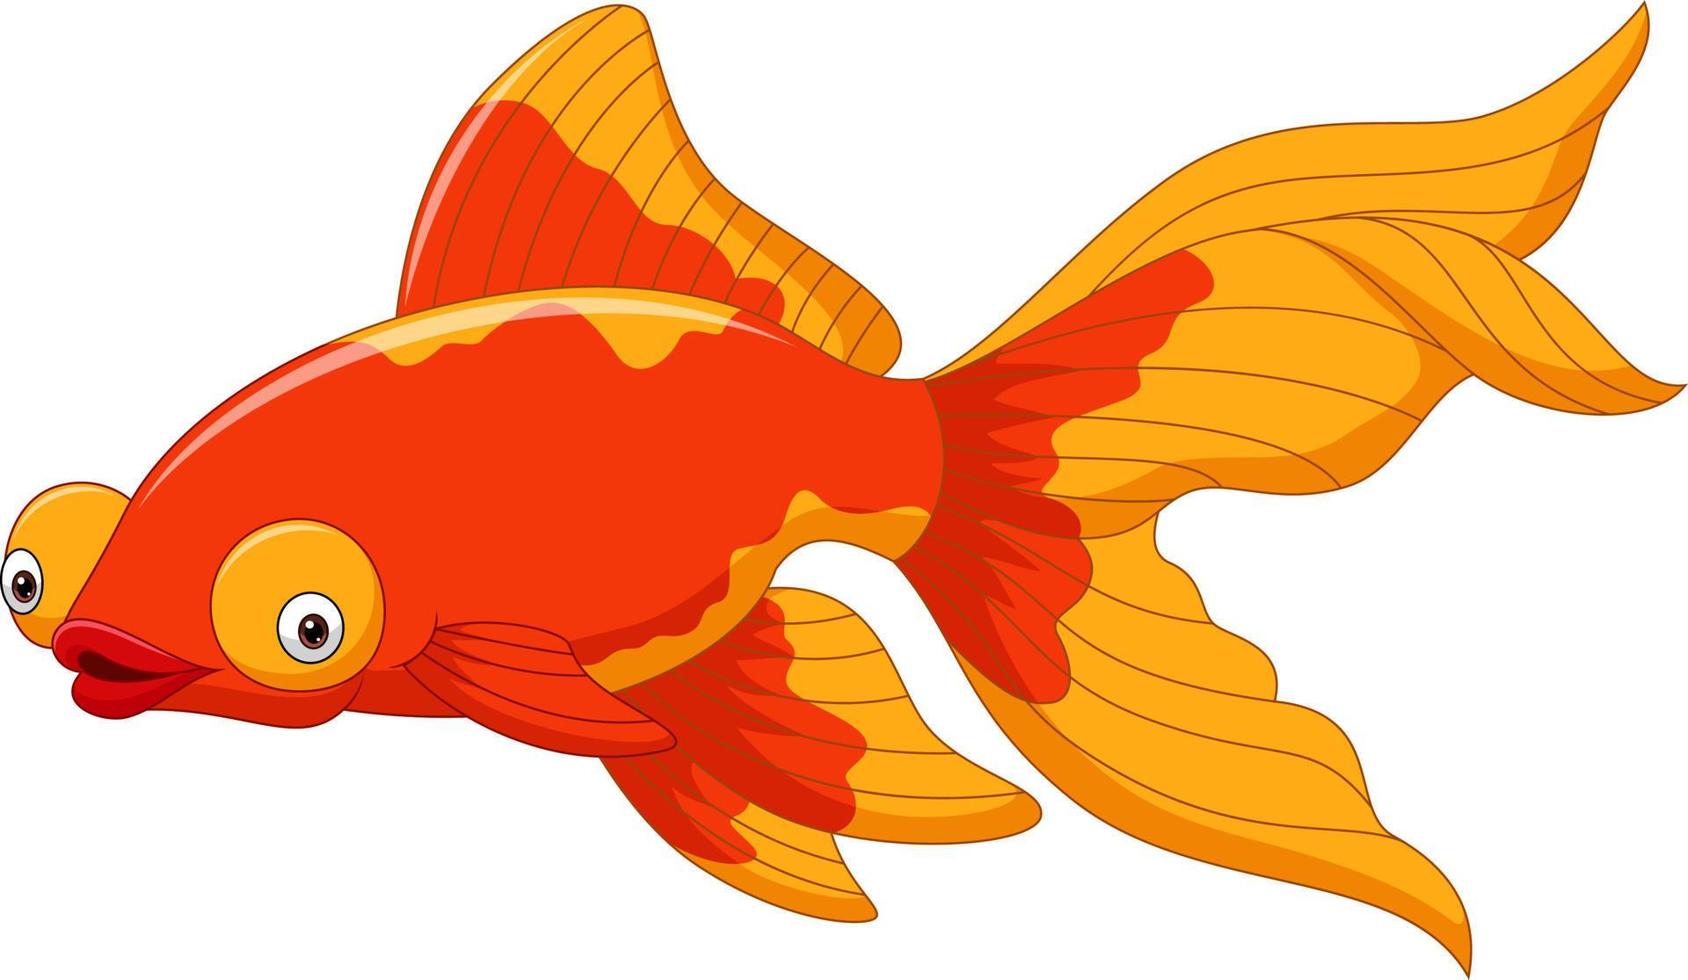 Cartoon cute goldfish on a white background vector